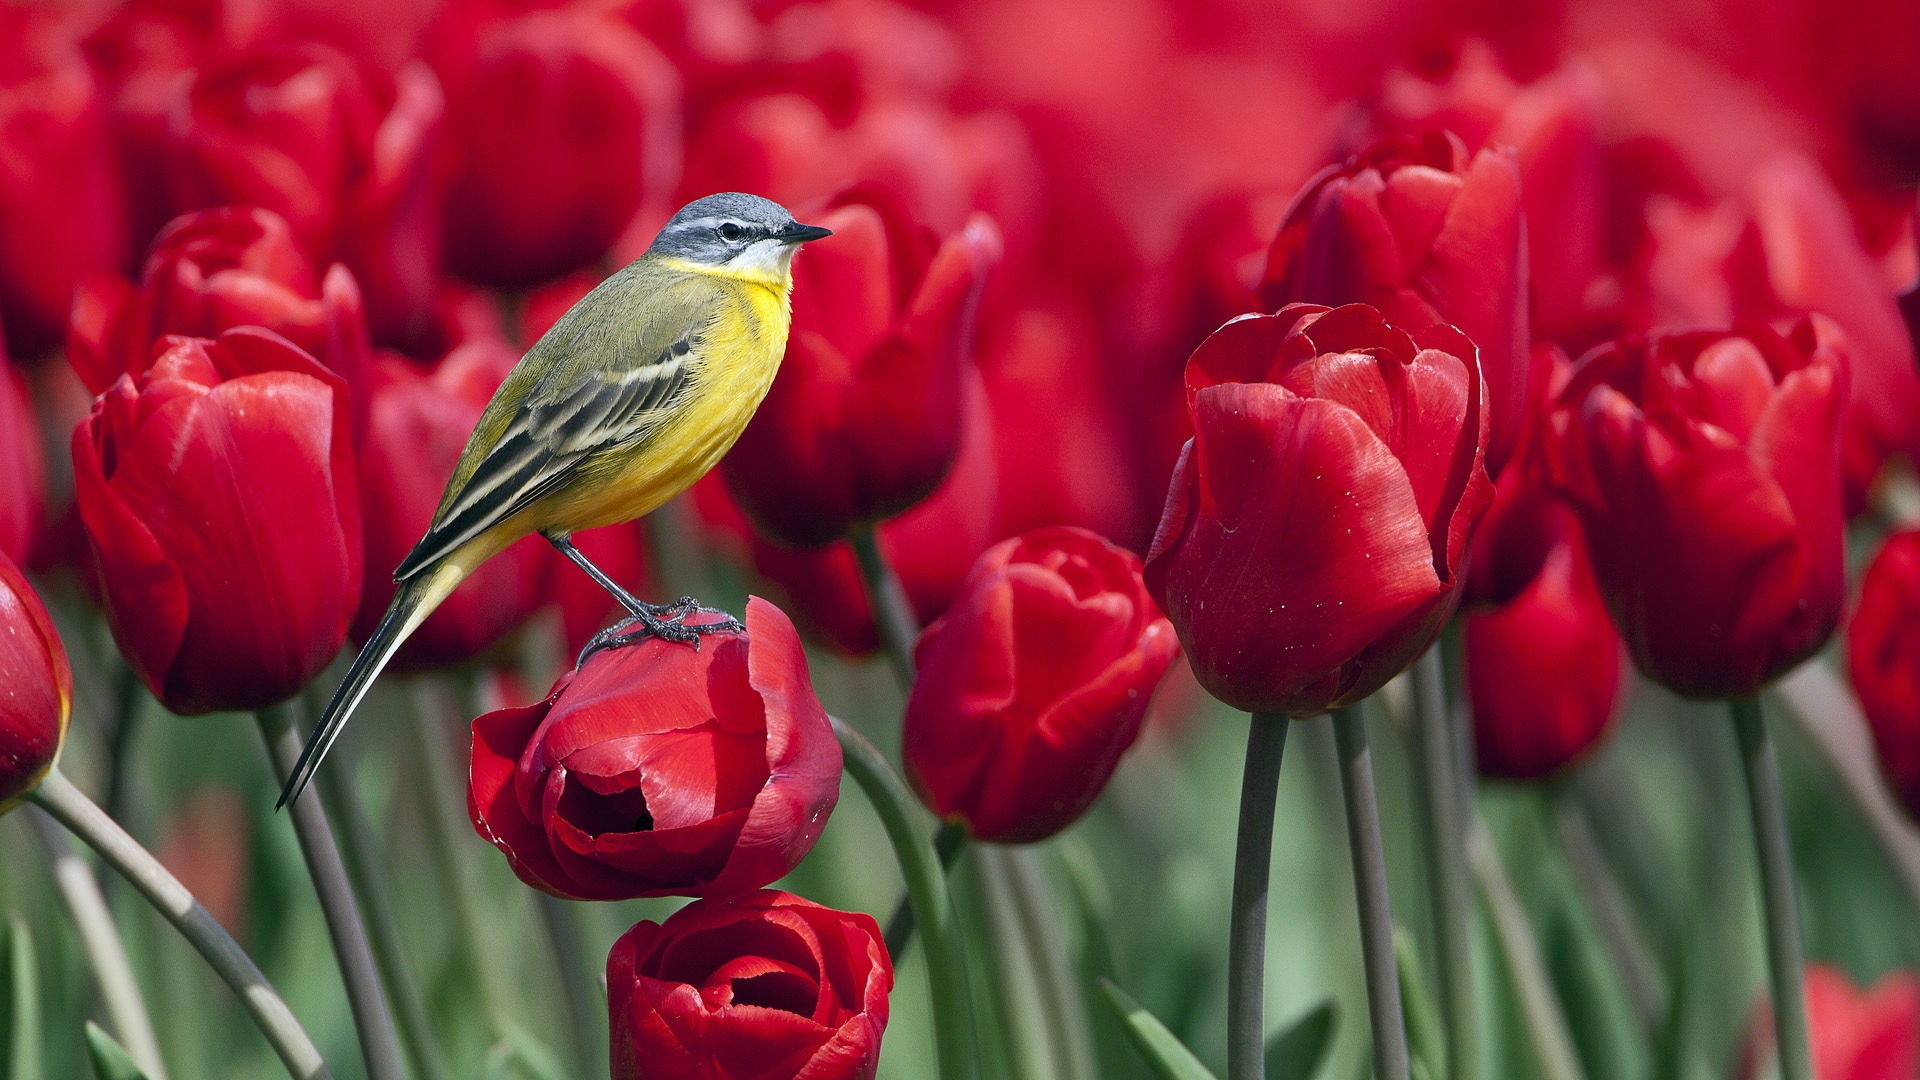 Wallpaper Of Birds And Flowers Which Is Under The